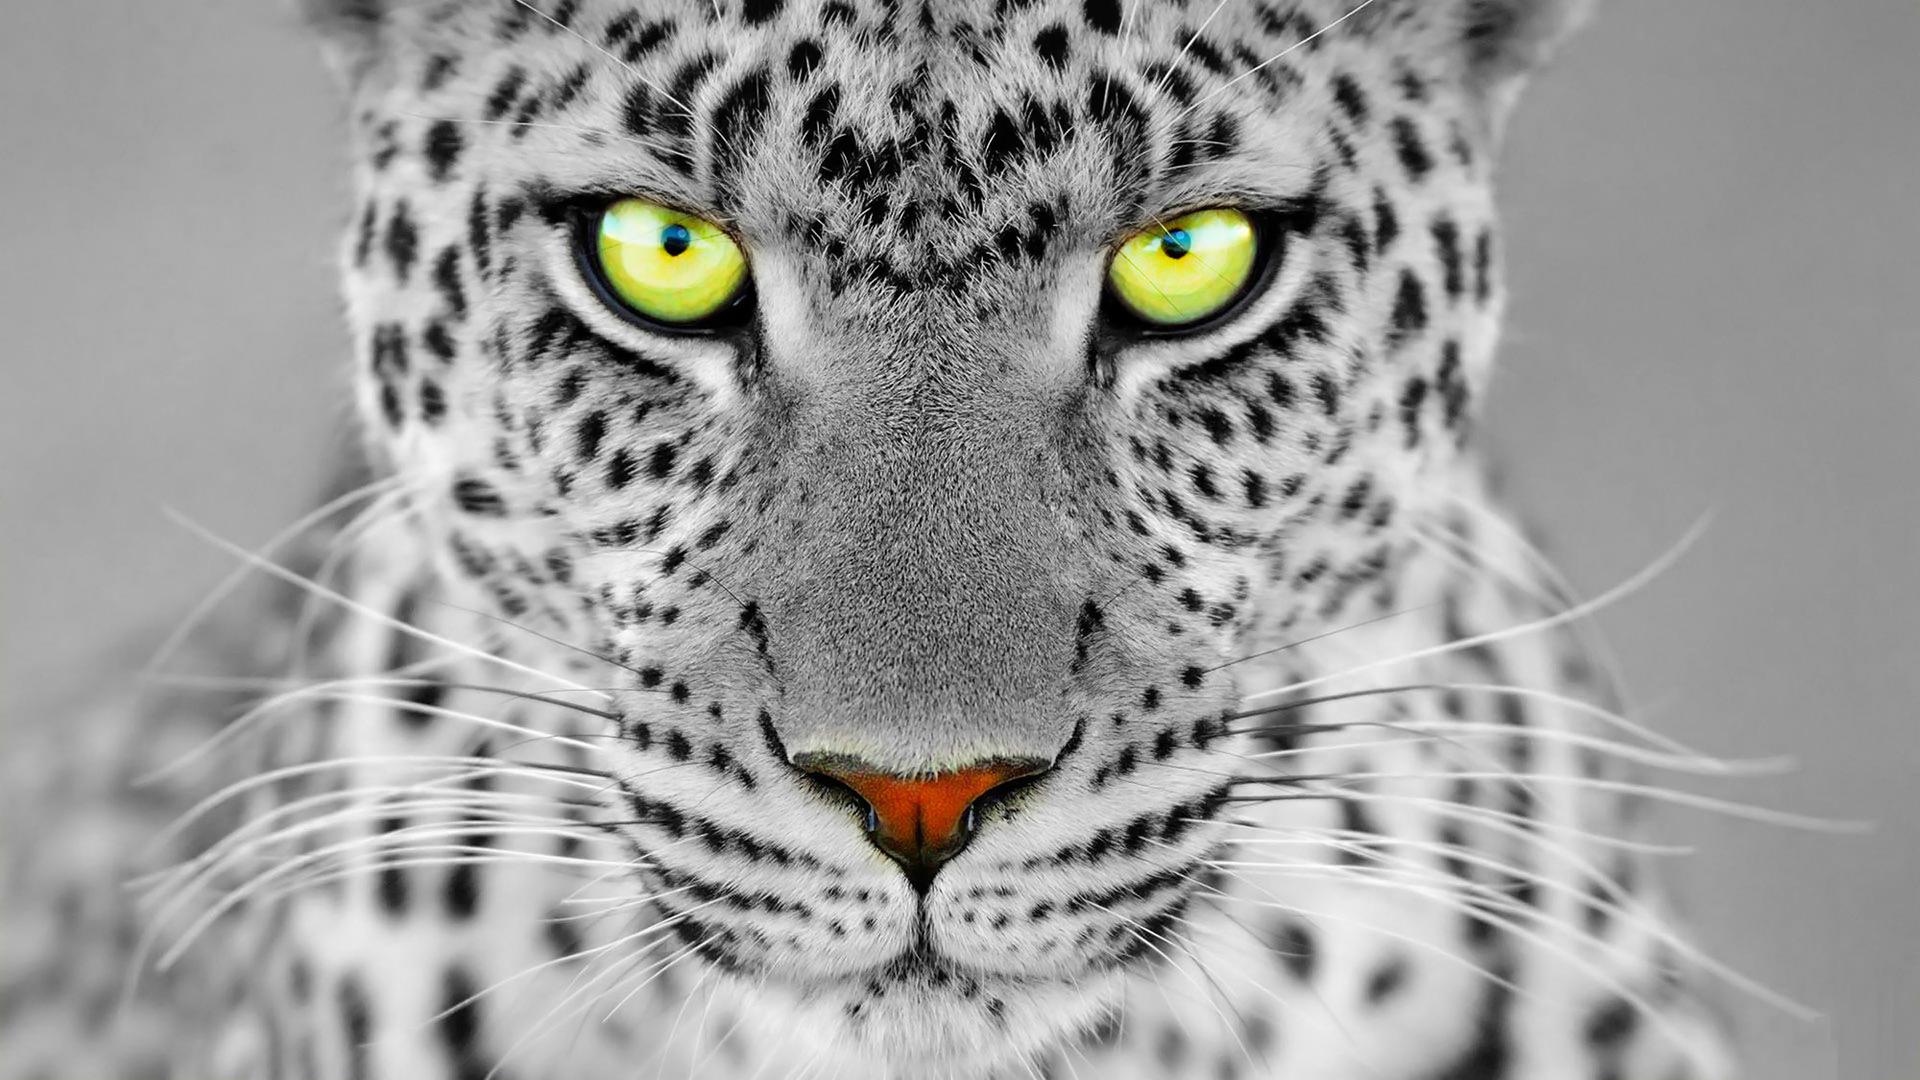 EYES OF A PANTHER WALLPAPER - HD Wallpapers